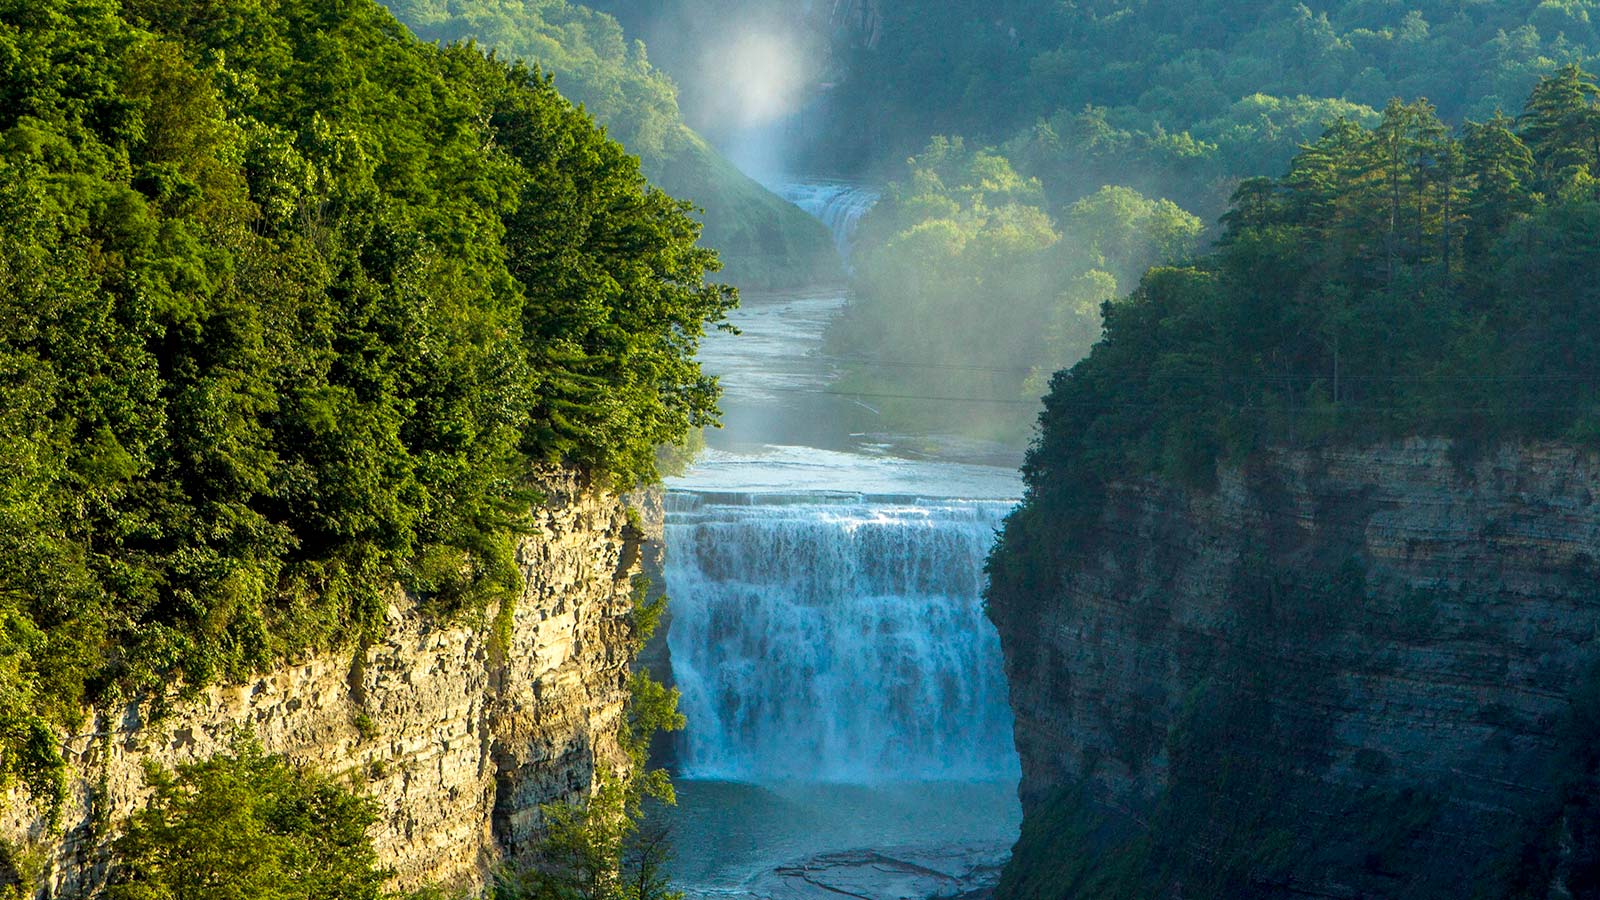 Voted the Number One State Park in America and dubbed the Grand Canyon of the East, you must check out all the Letchworth State Park things to do and see!